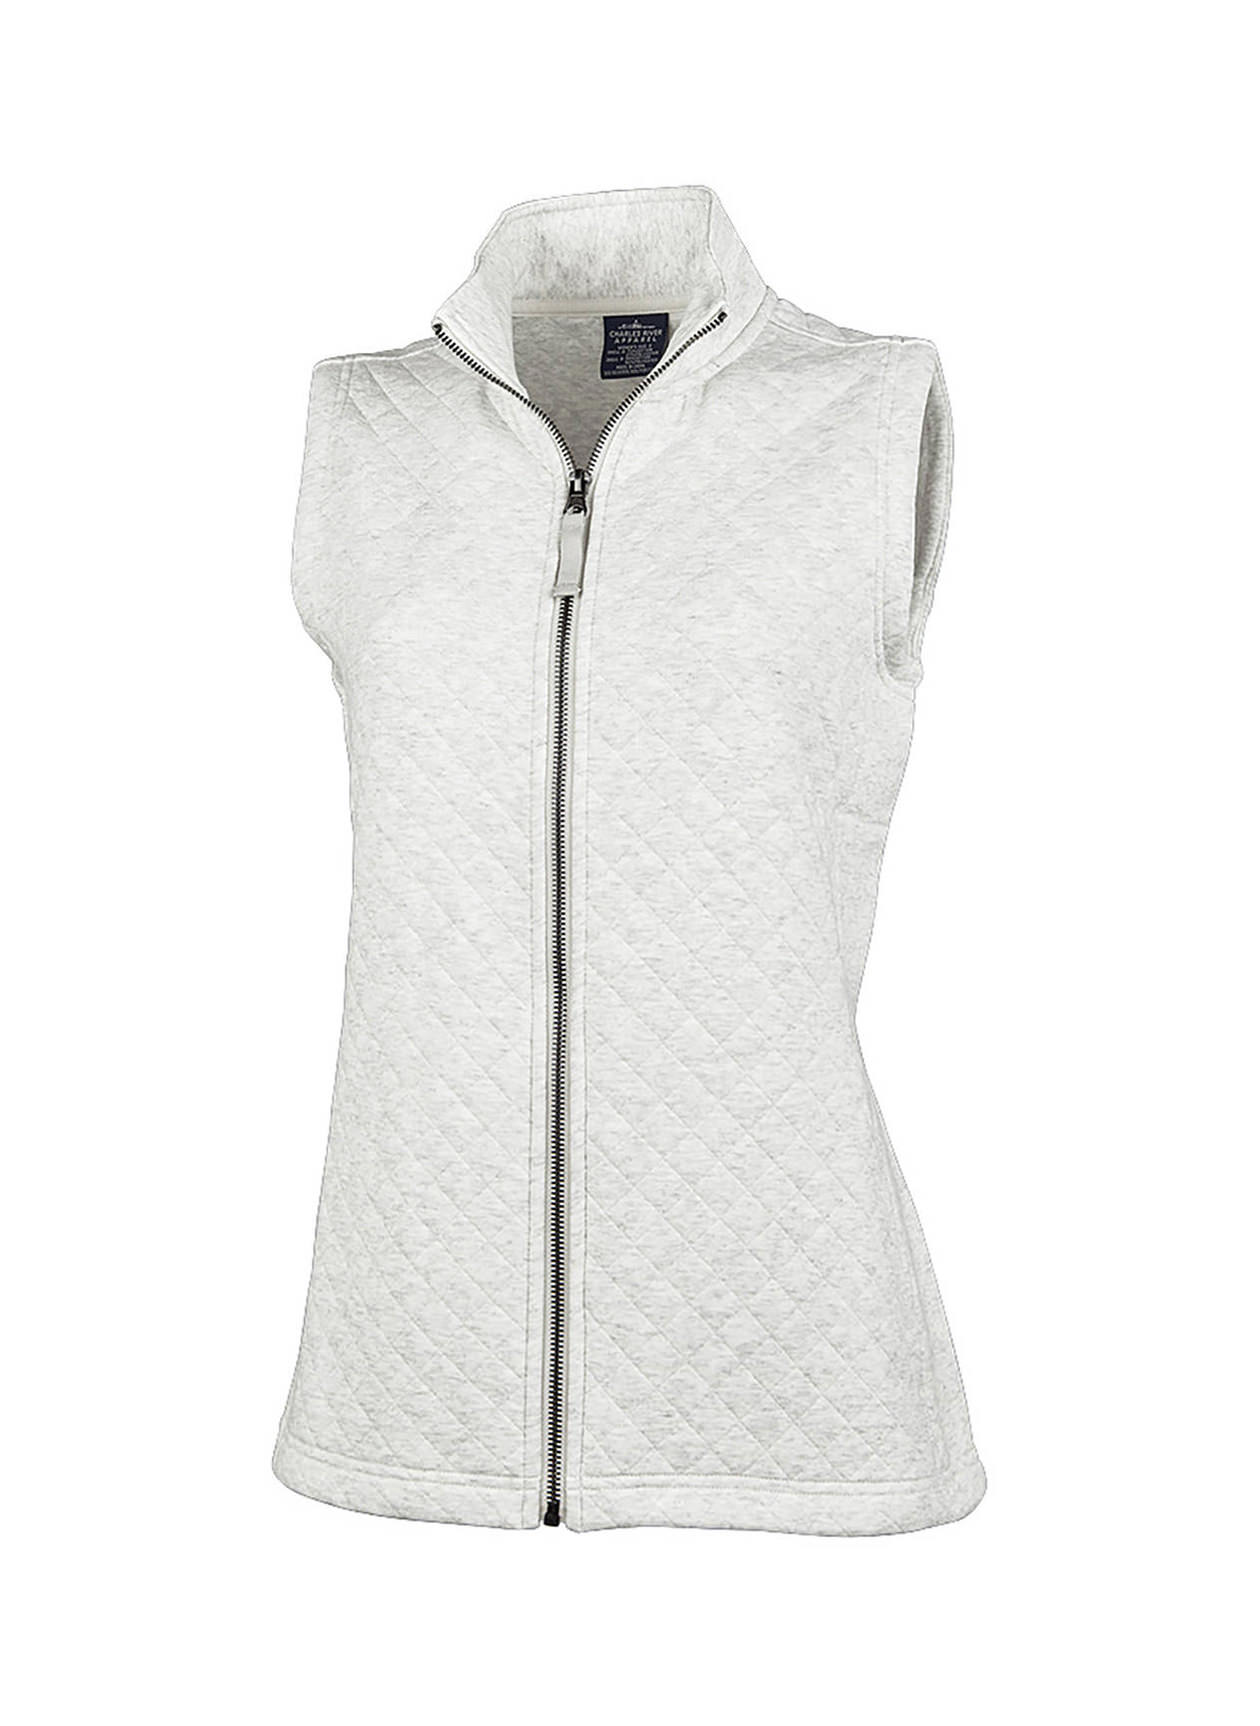 Charles River Women's Oatmeal Heather Franconia Quilted Vest